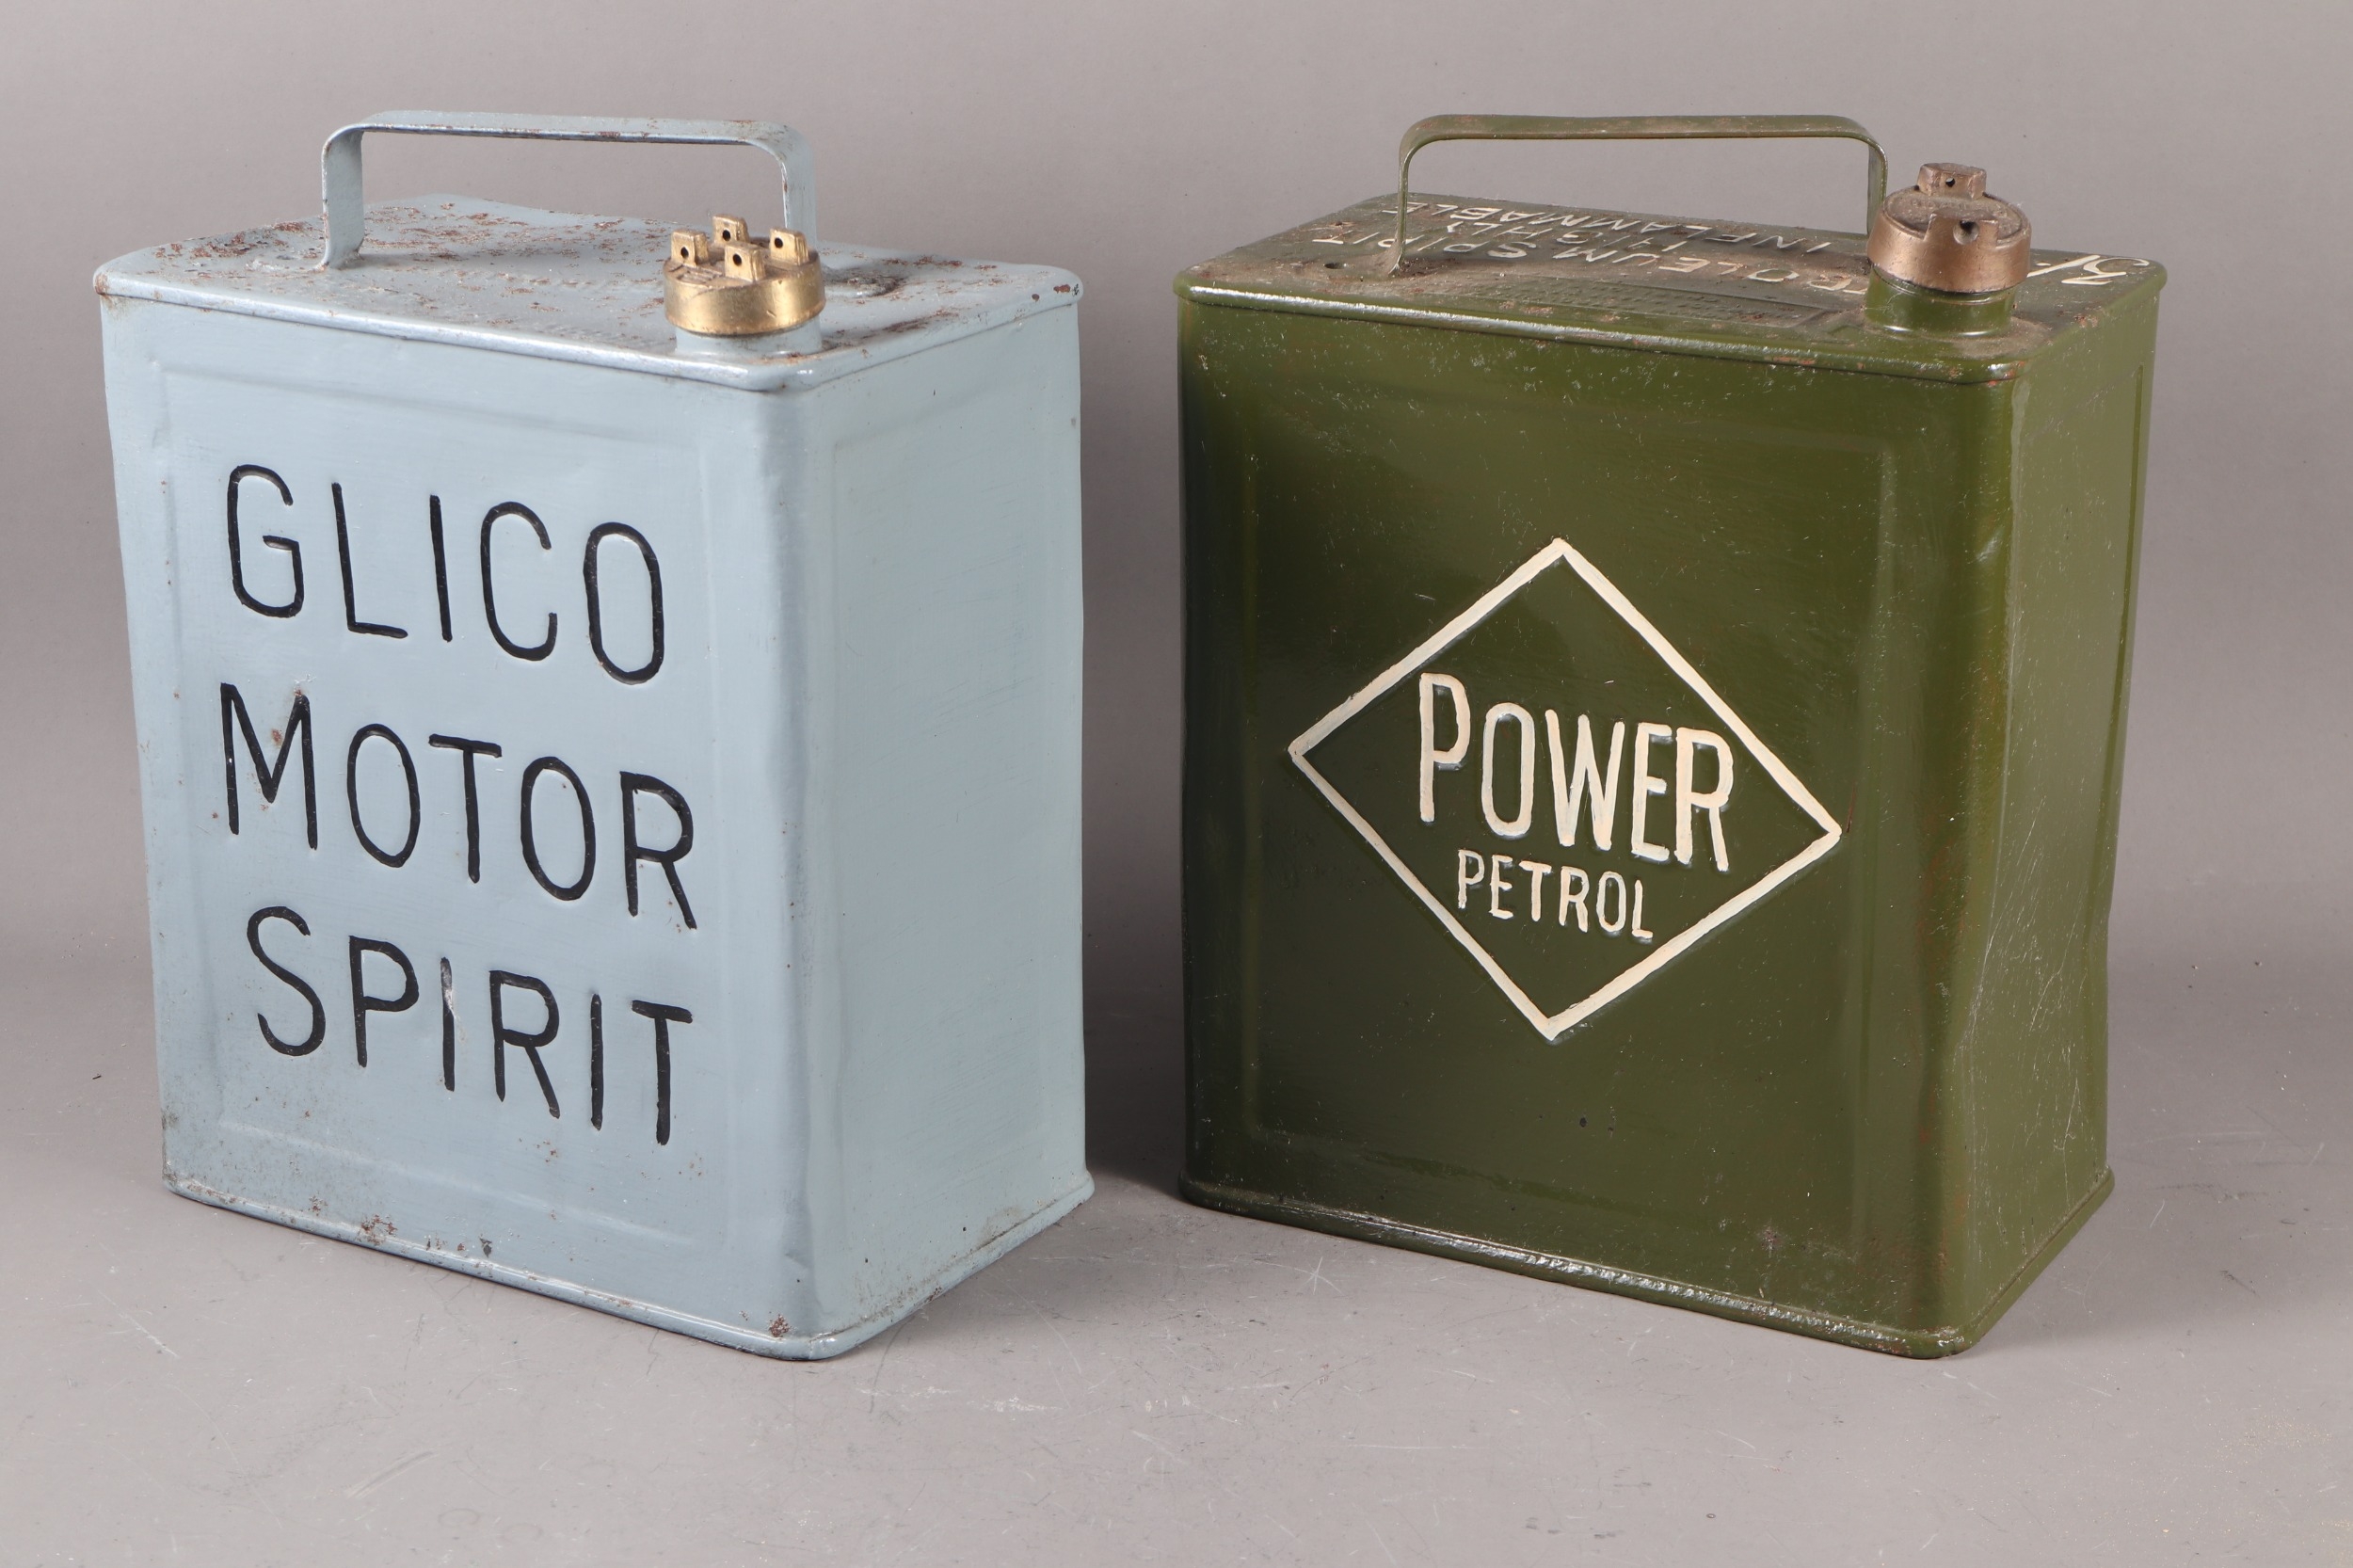 A vintage pale blue painted Glico Motor Spirit can, 12 1/2" high, and a green painted Power Petrol